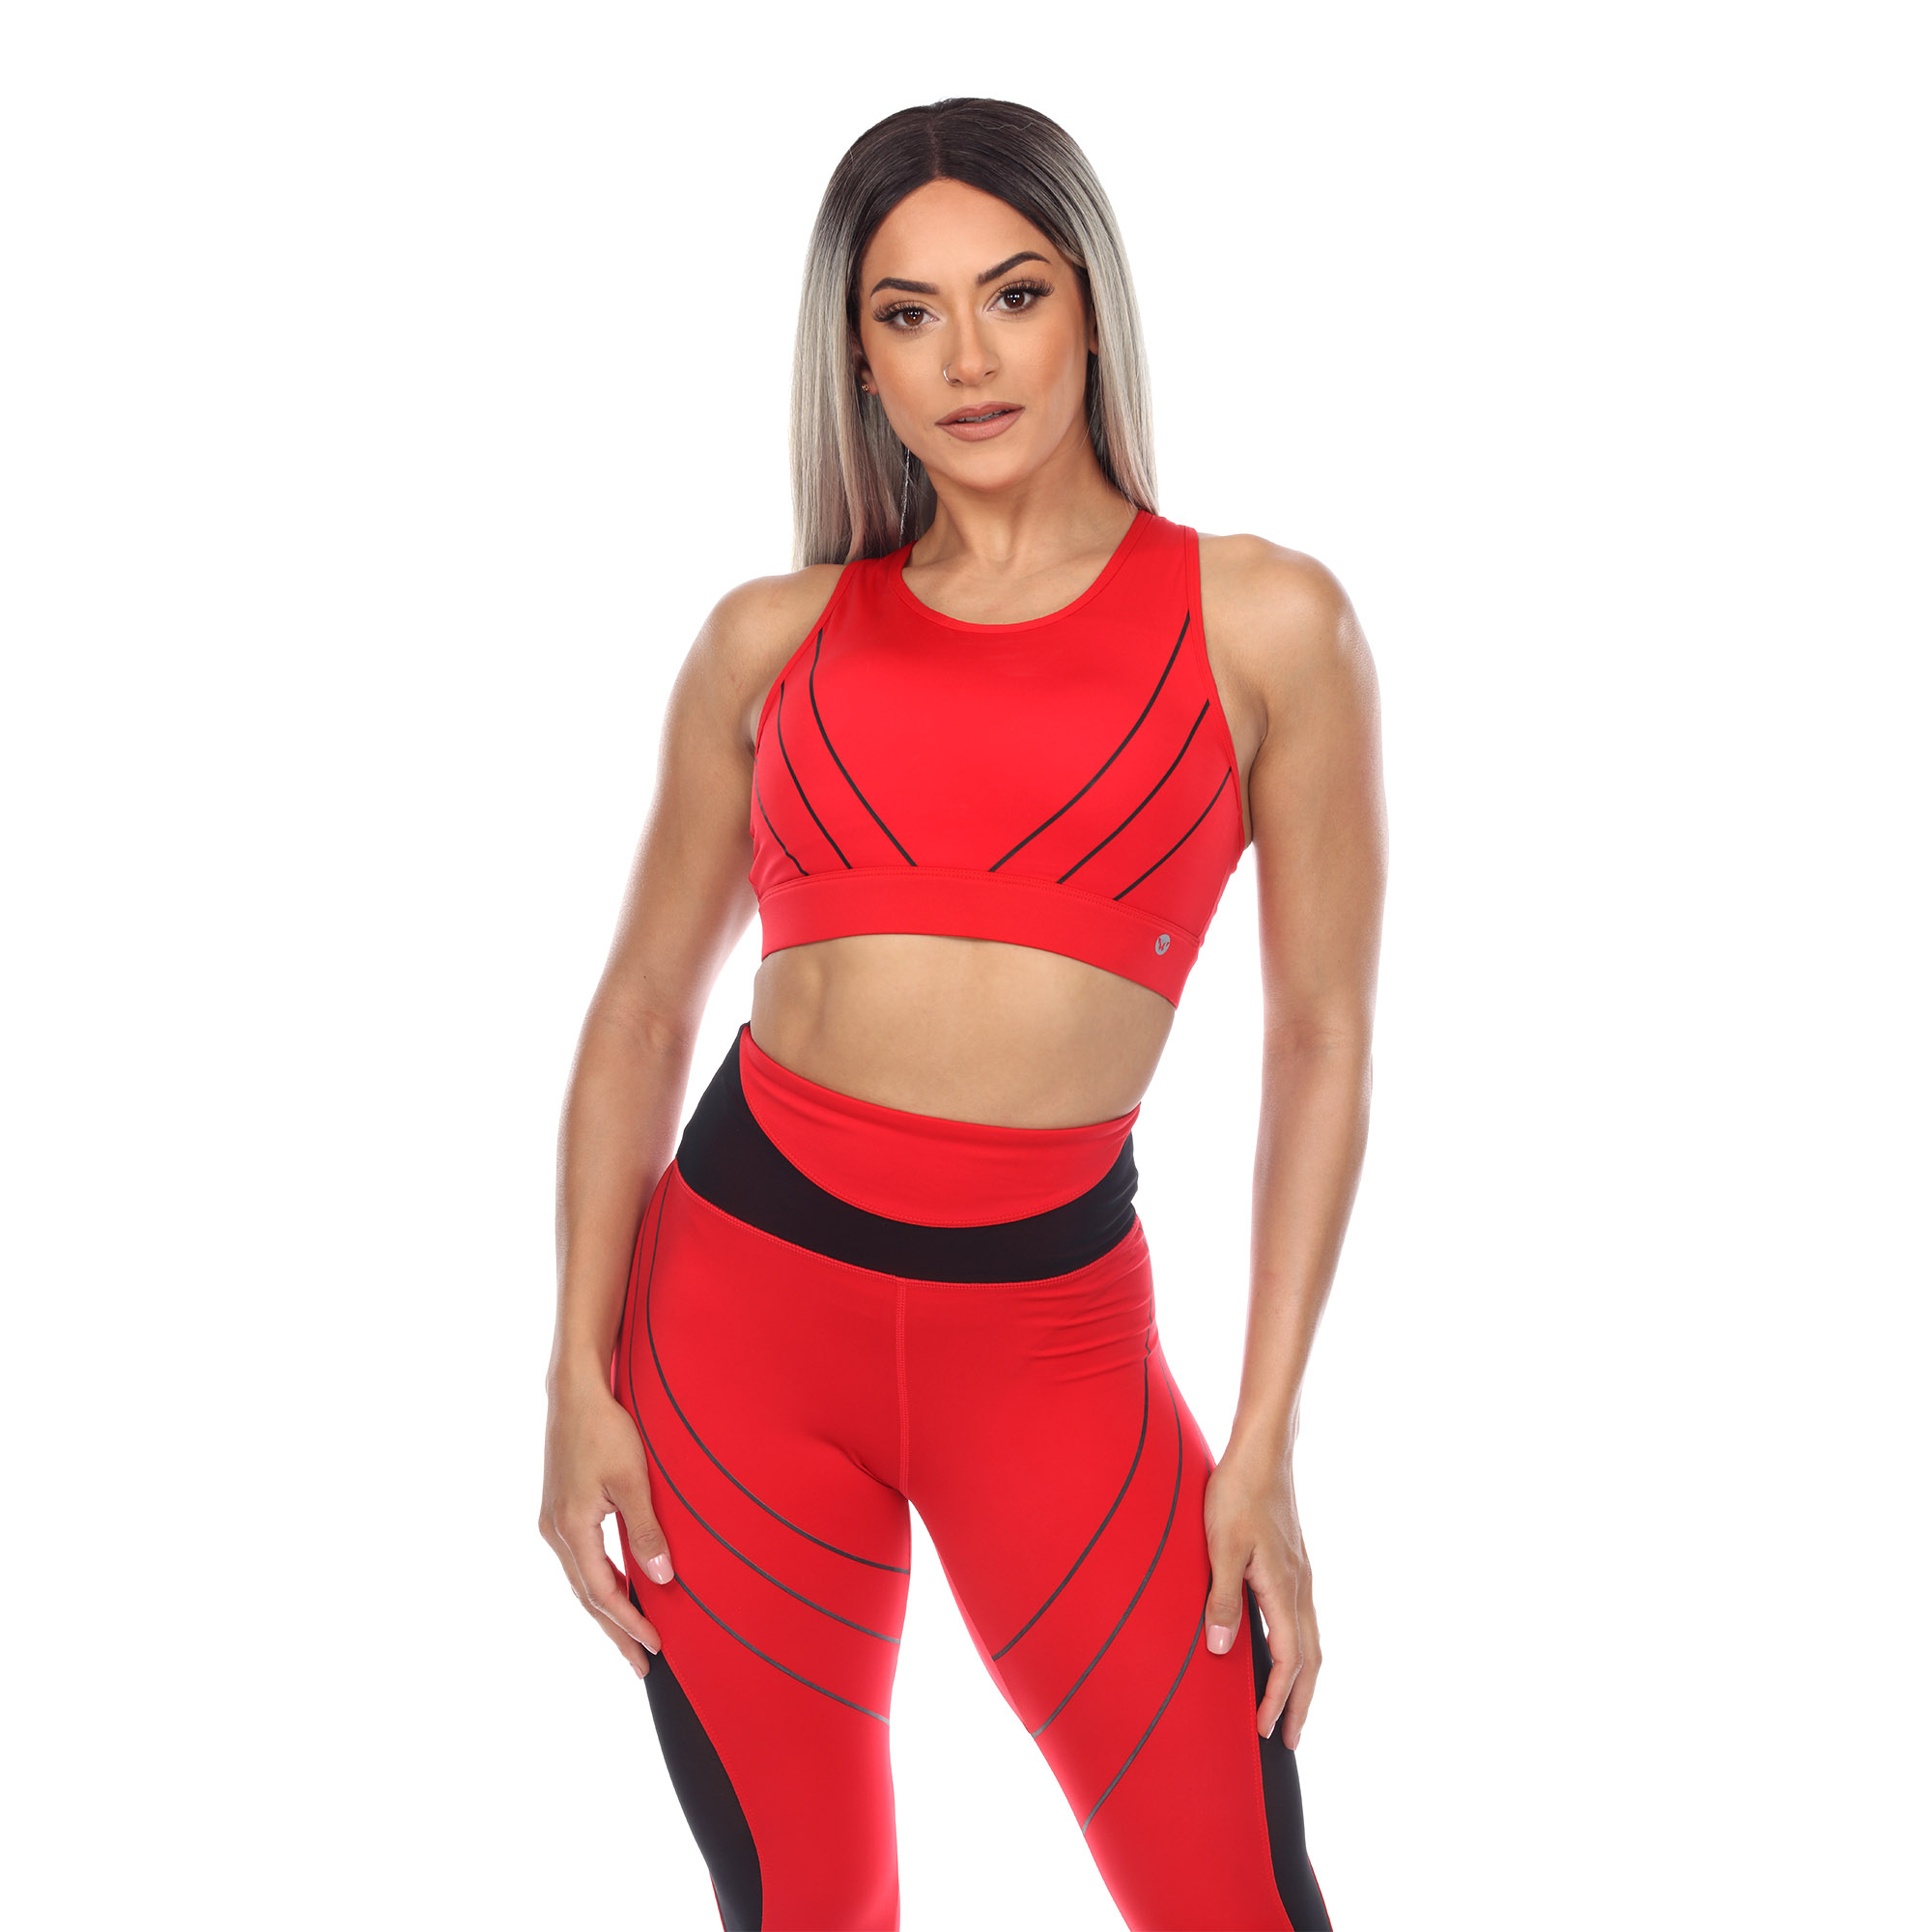 White Mark Women's Cut Out Back Mesh Sports Bra - Red, X-Large